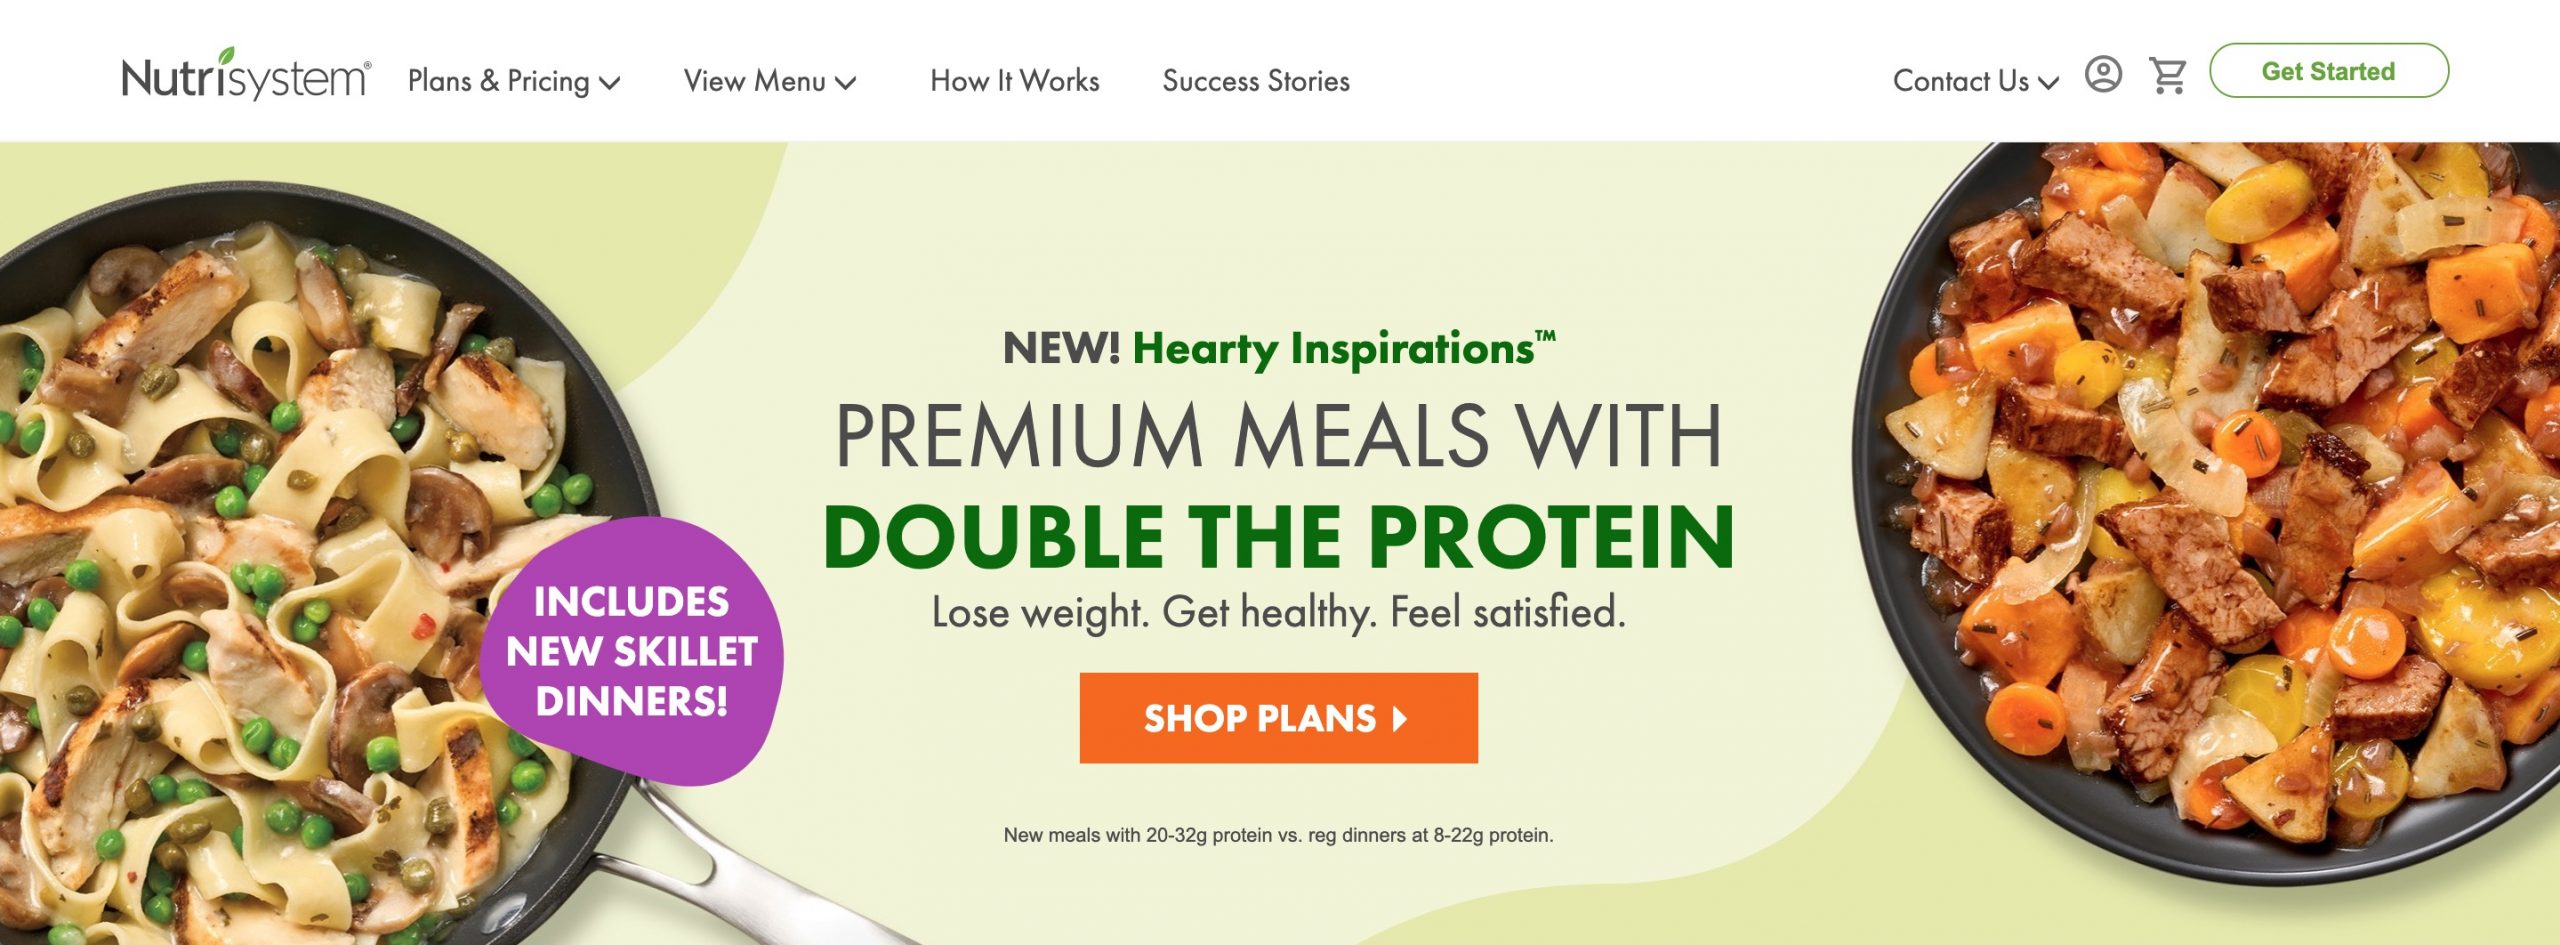 NutriSystem main page